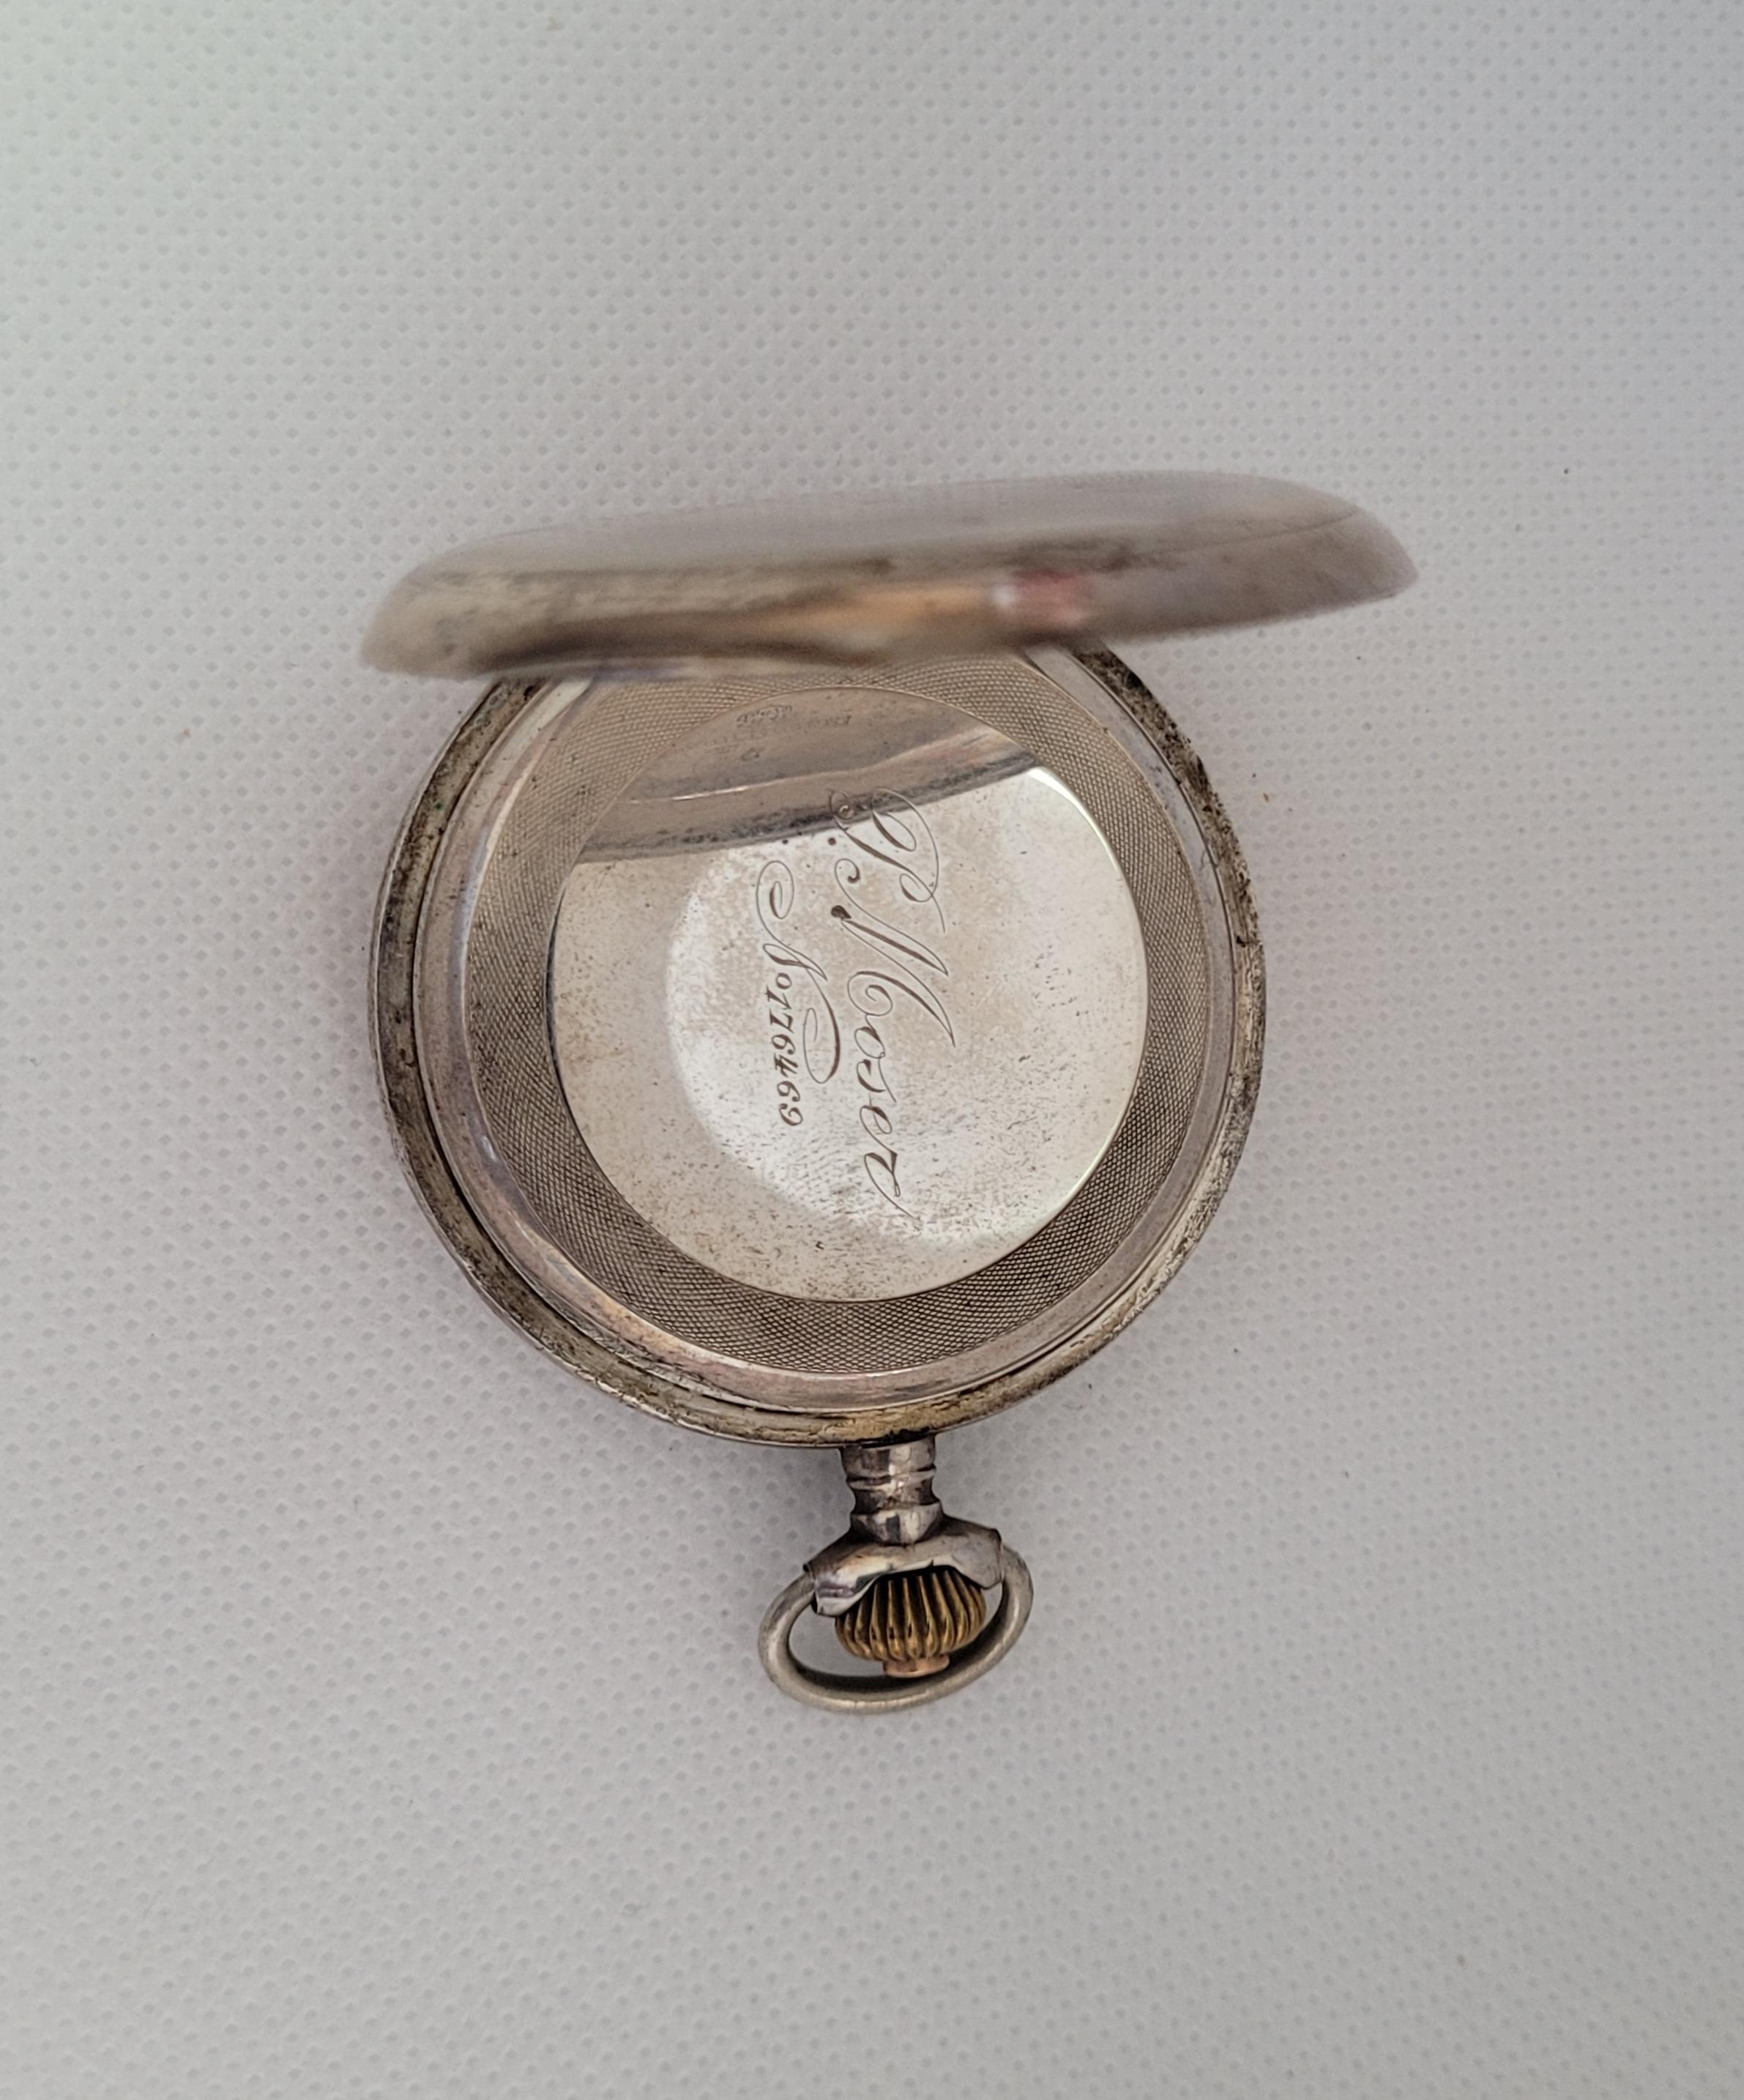 P Moser Pocket Watch Working Case Year 1910 Swiss Made 875 Silver For Sale 3